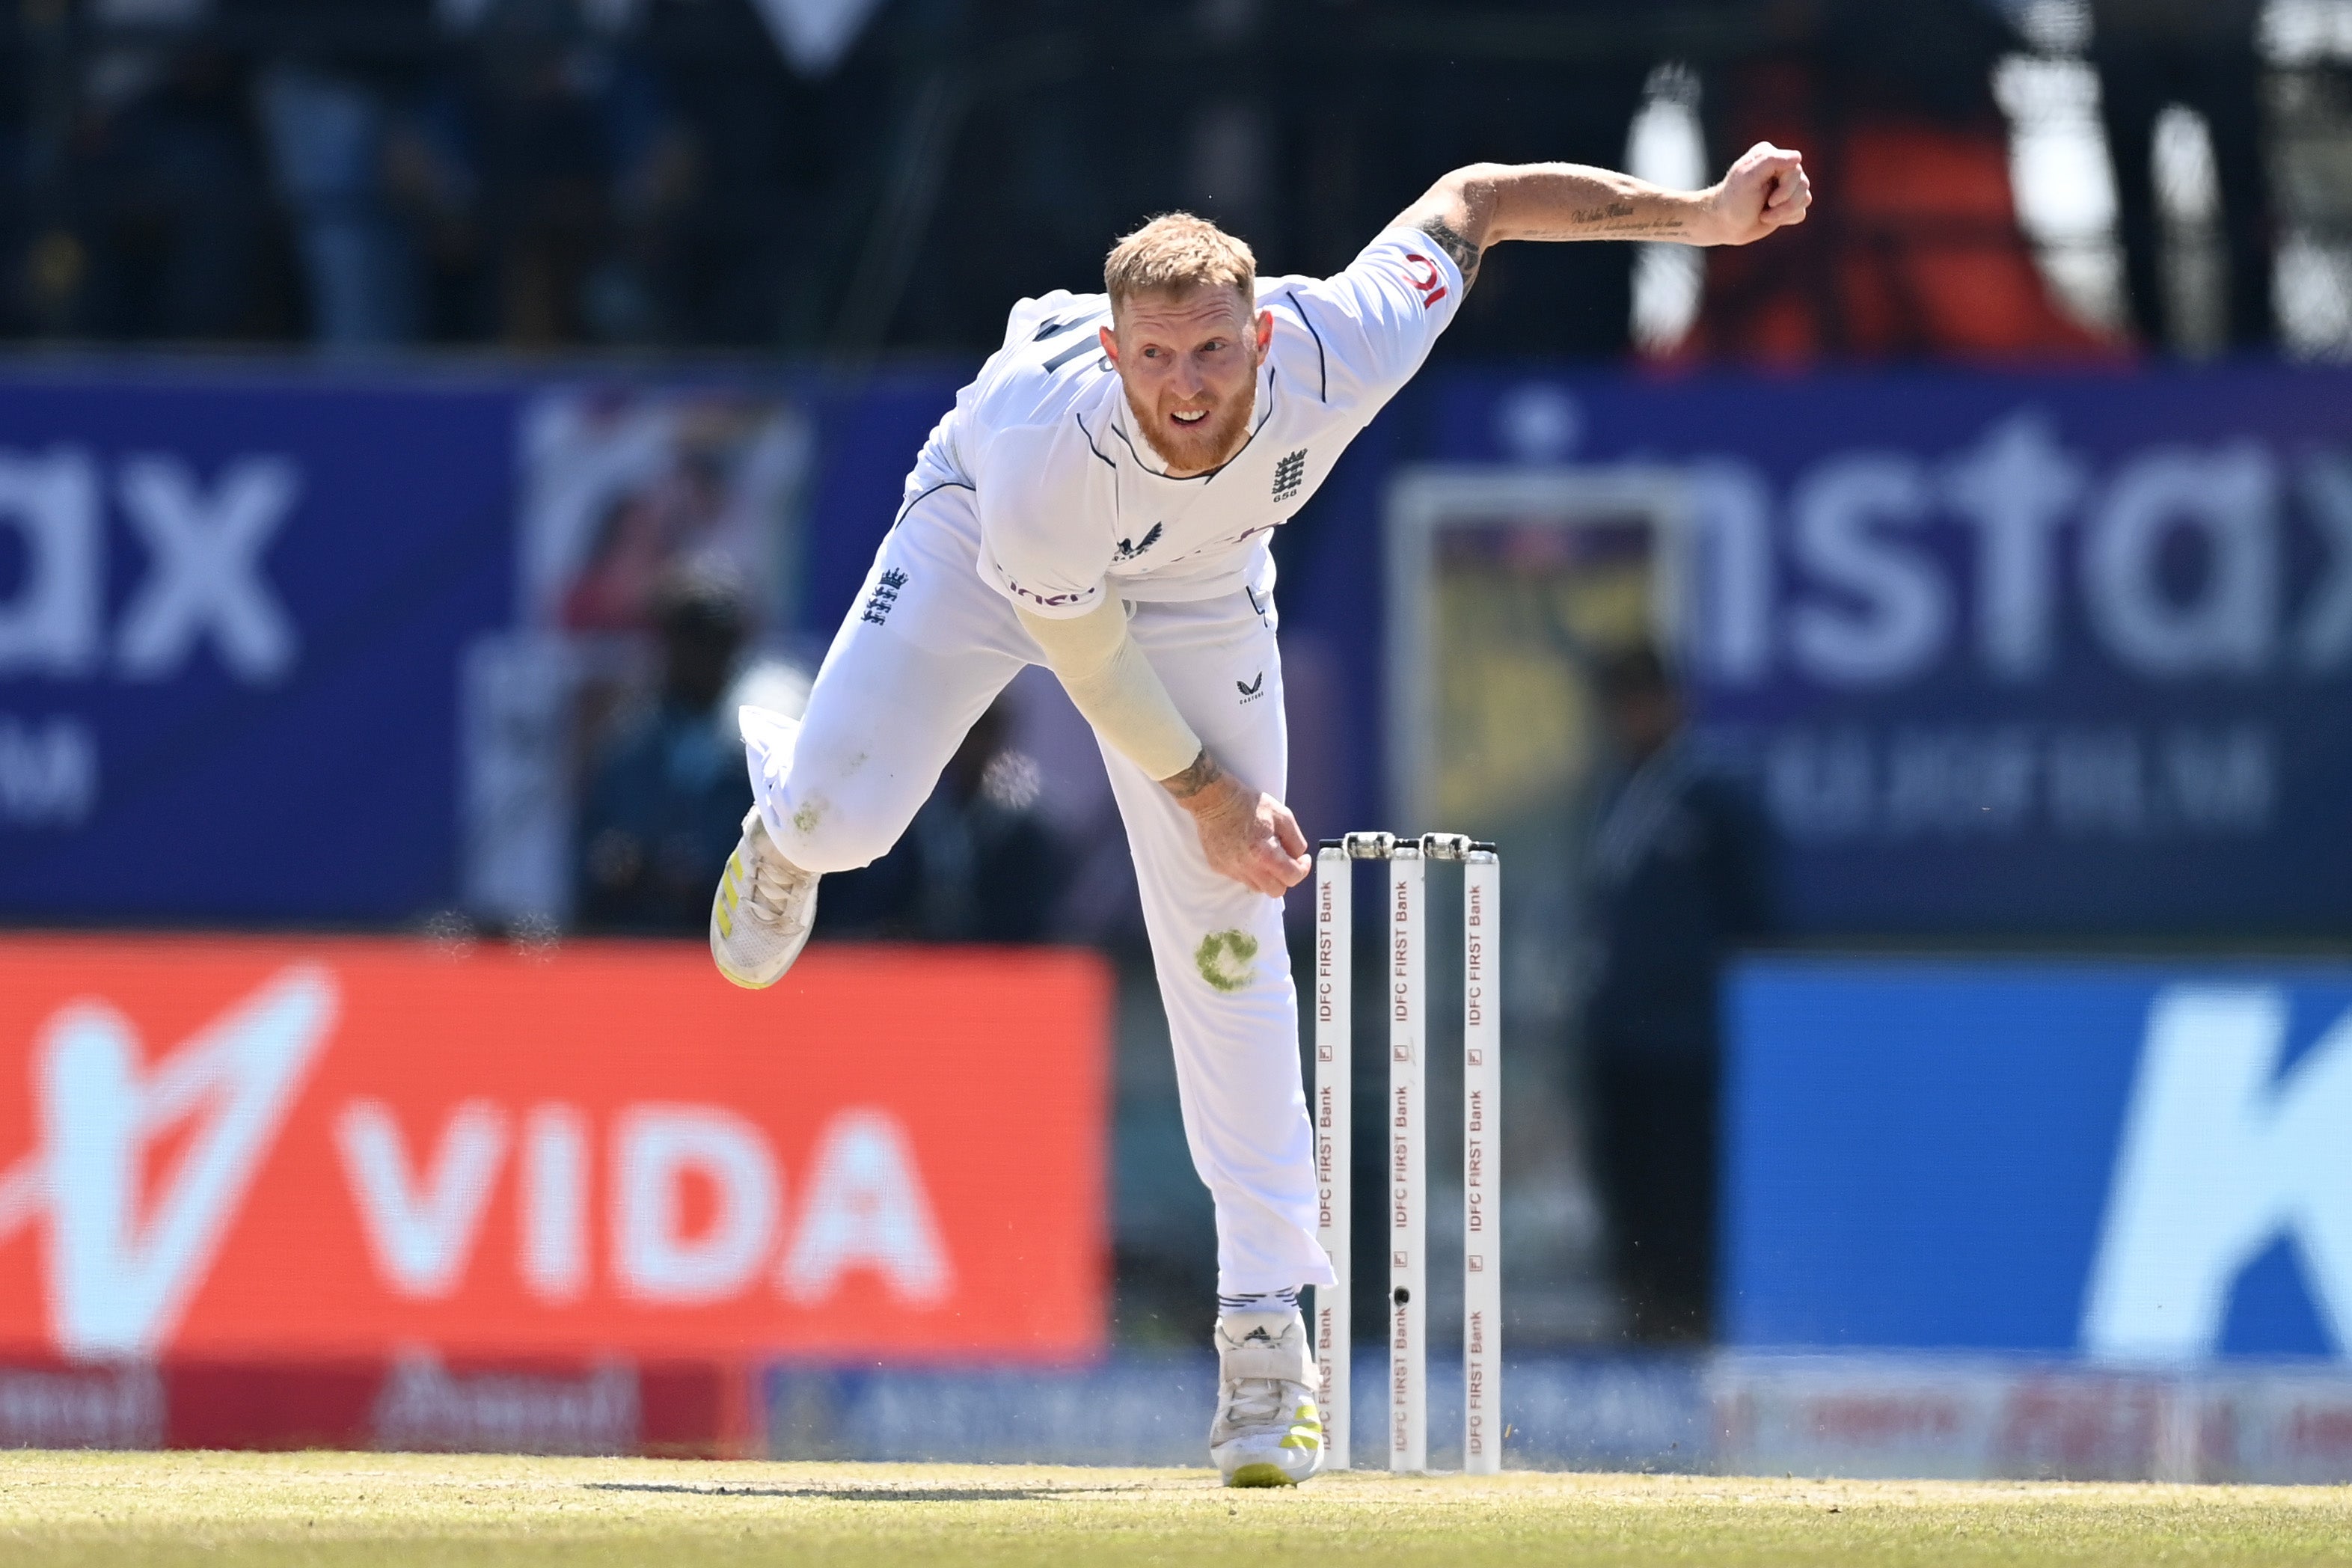 Ben Stokes only returned to bowling in the fifth Test of the series against India